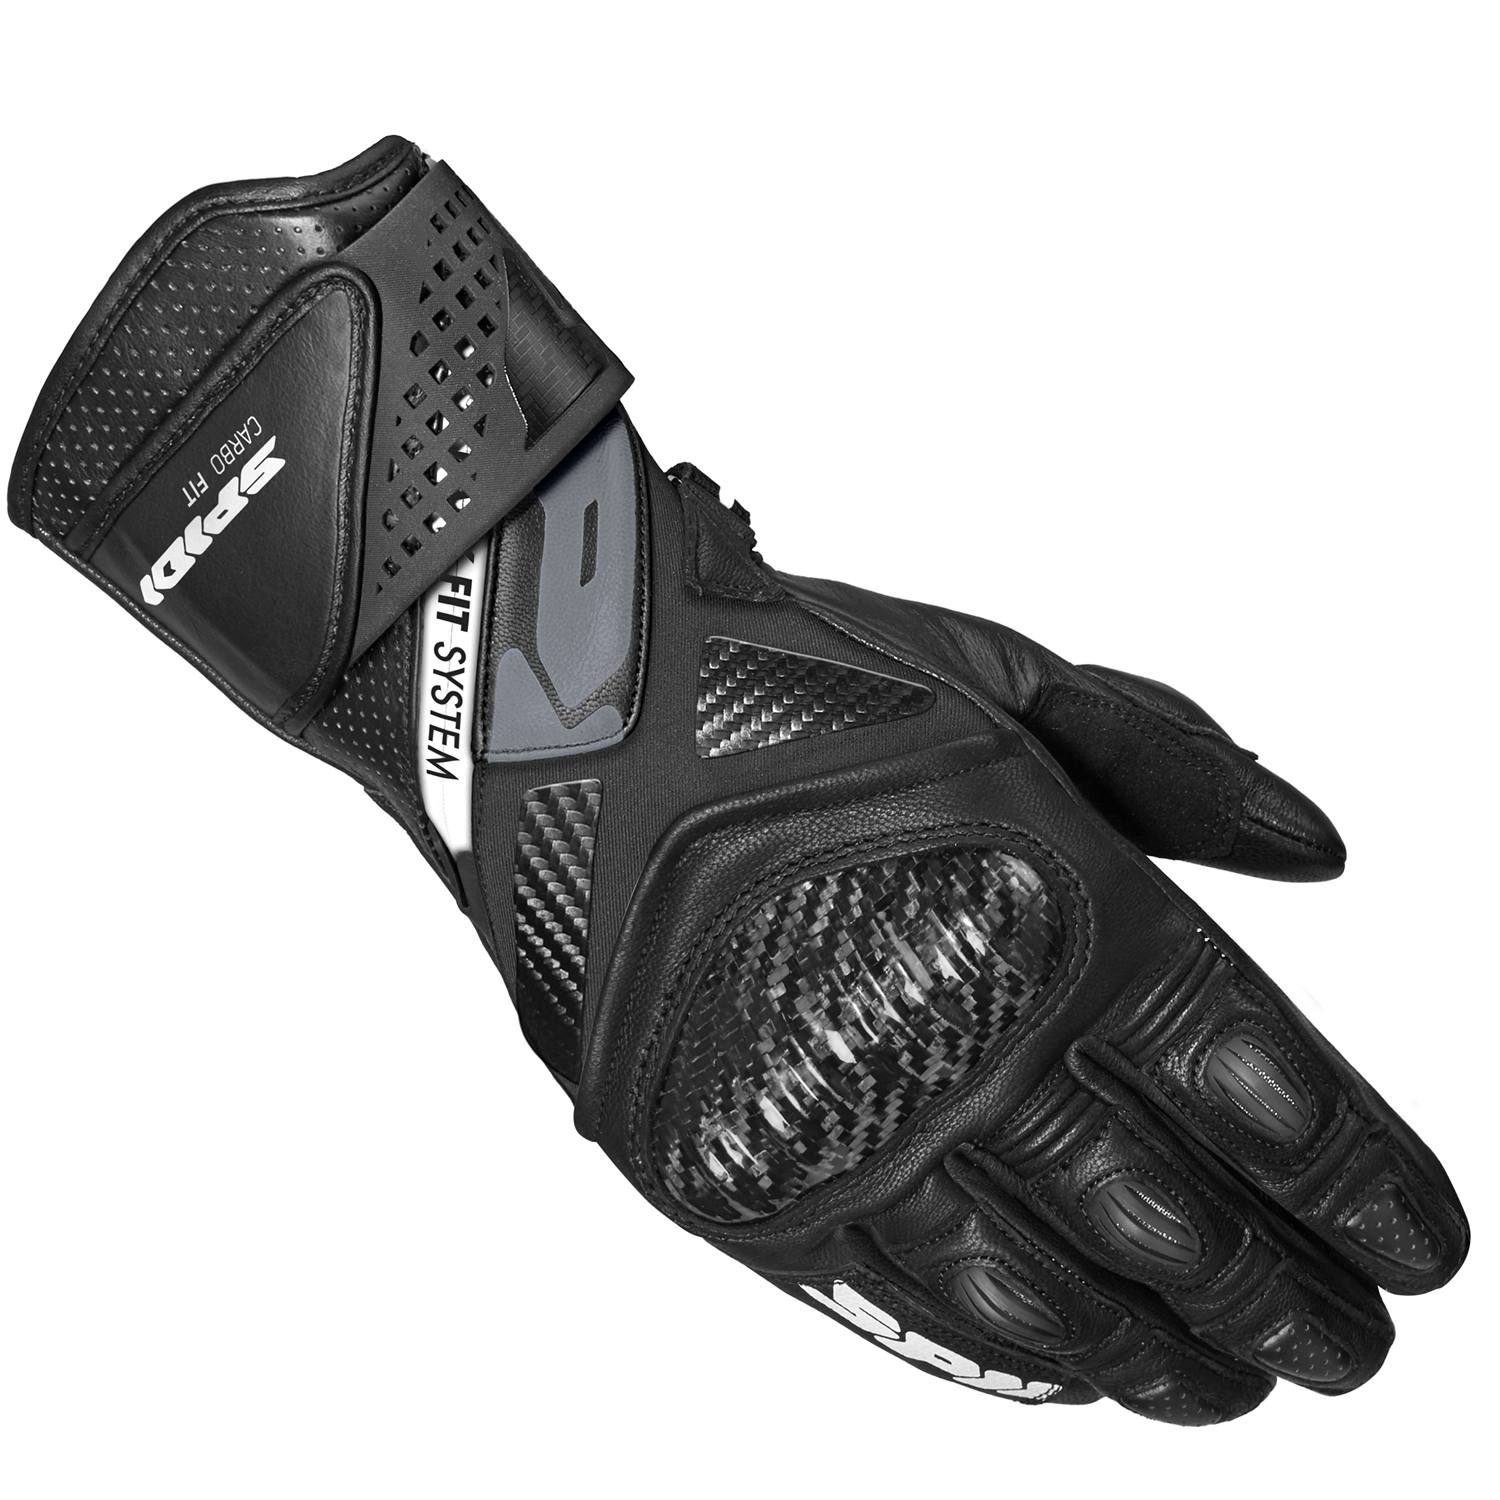 Image of Spidi Carbo Fit Gloves Black Size 3XL ID 8030161481525